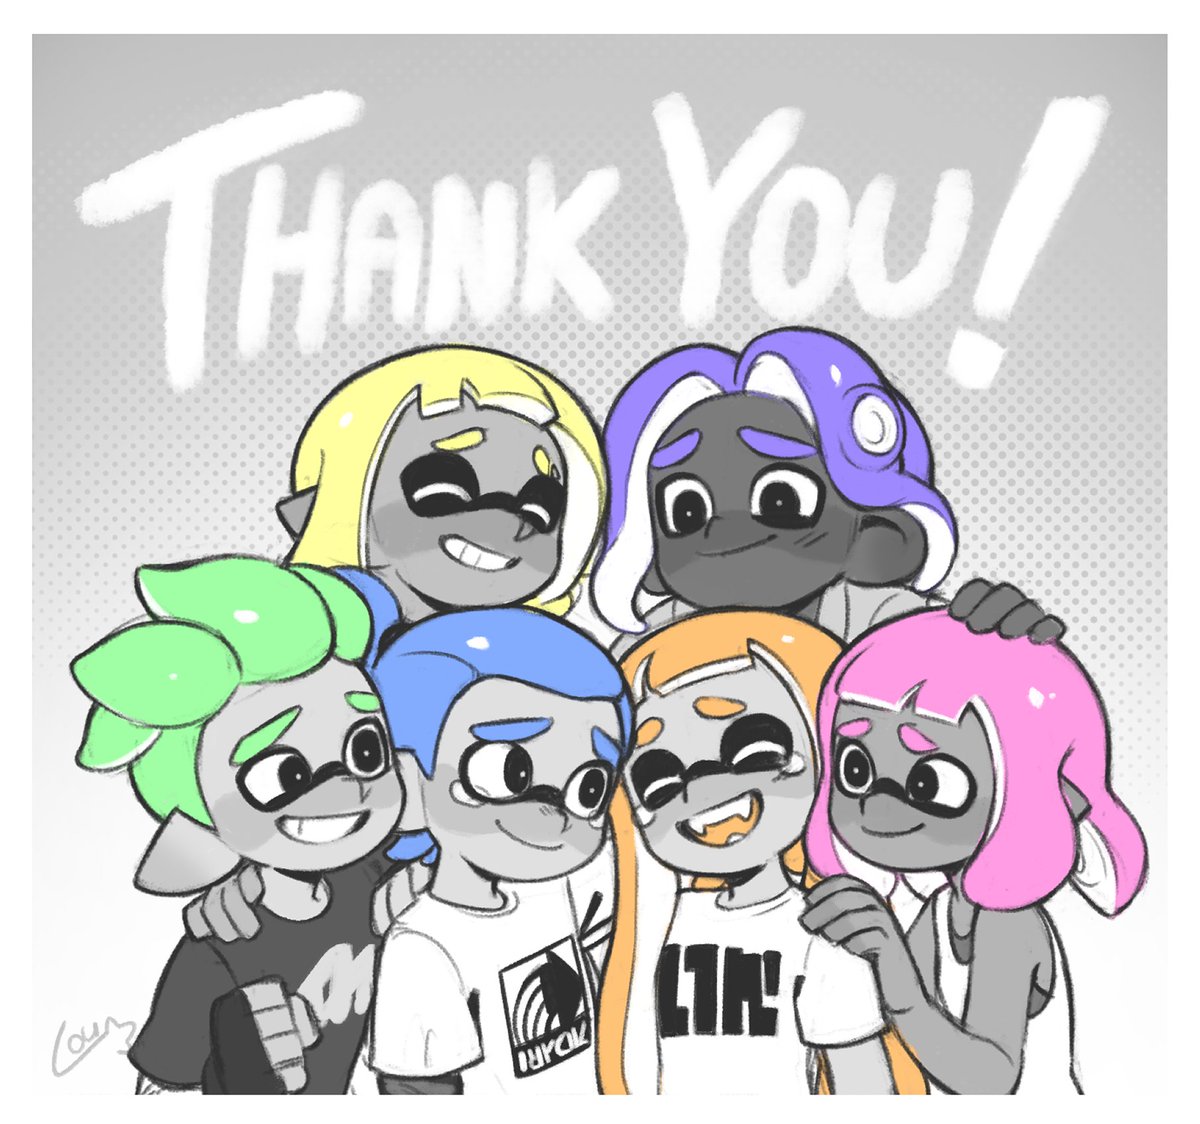 For being the foundation of my favorite franchise and for being a legend... You'll live in our hearts forever, #GoodbyeSplatoon1 🦑✨